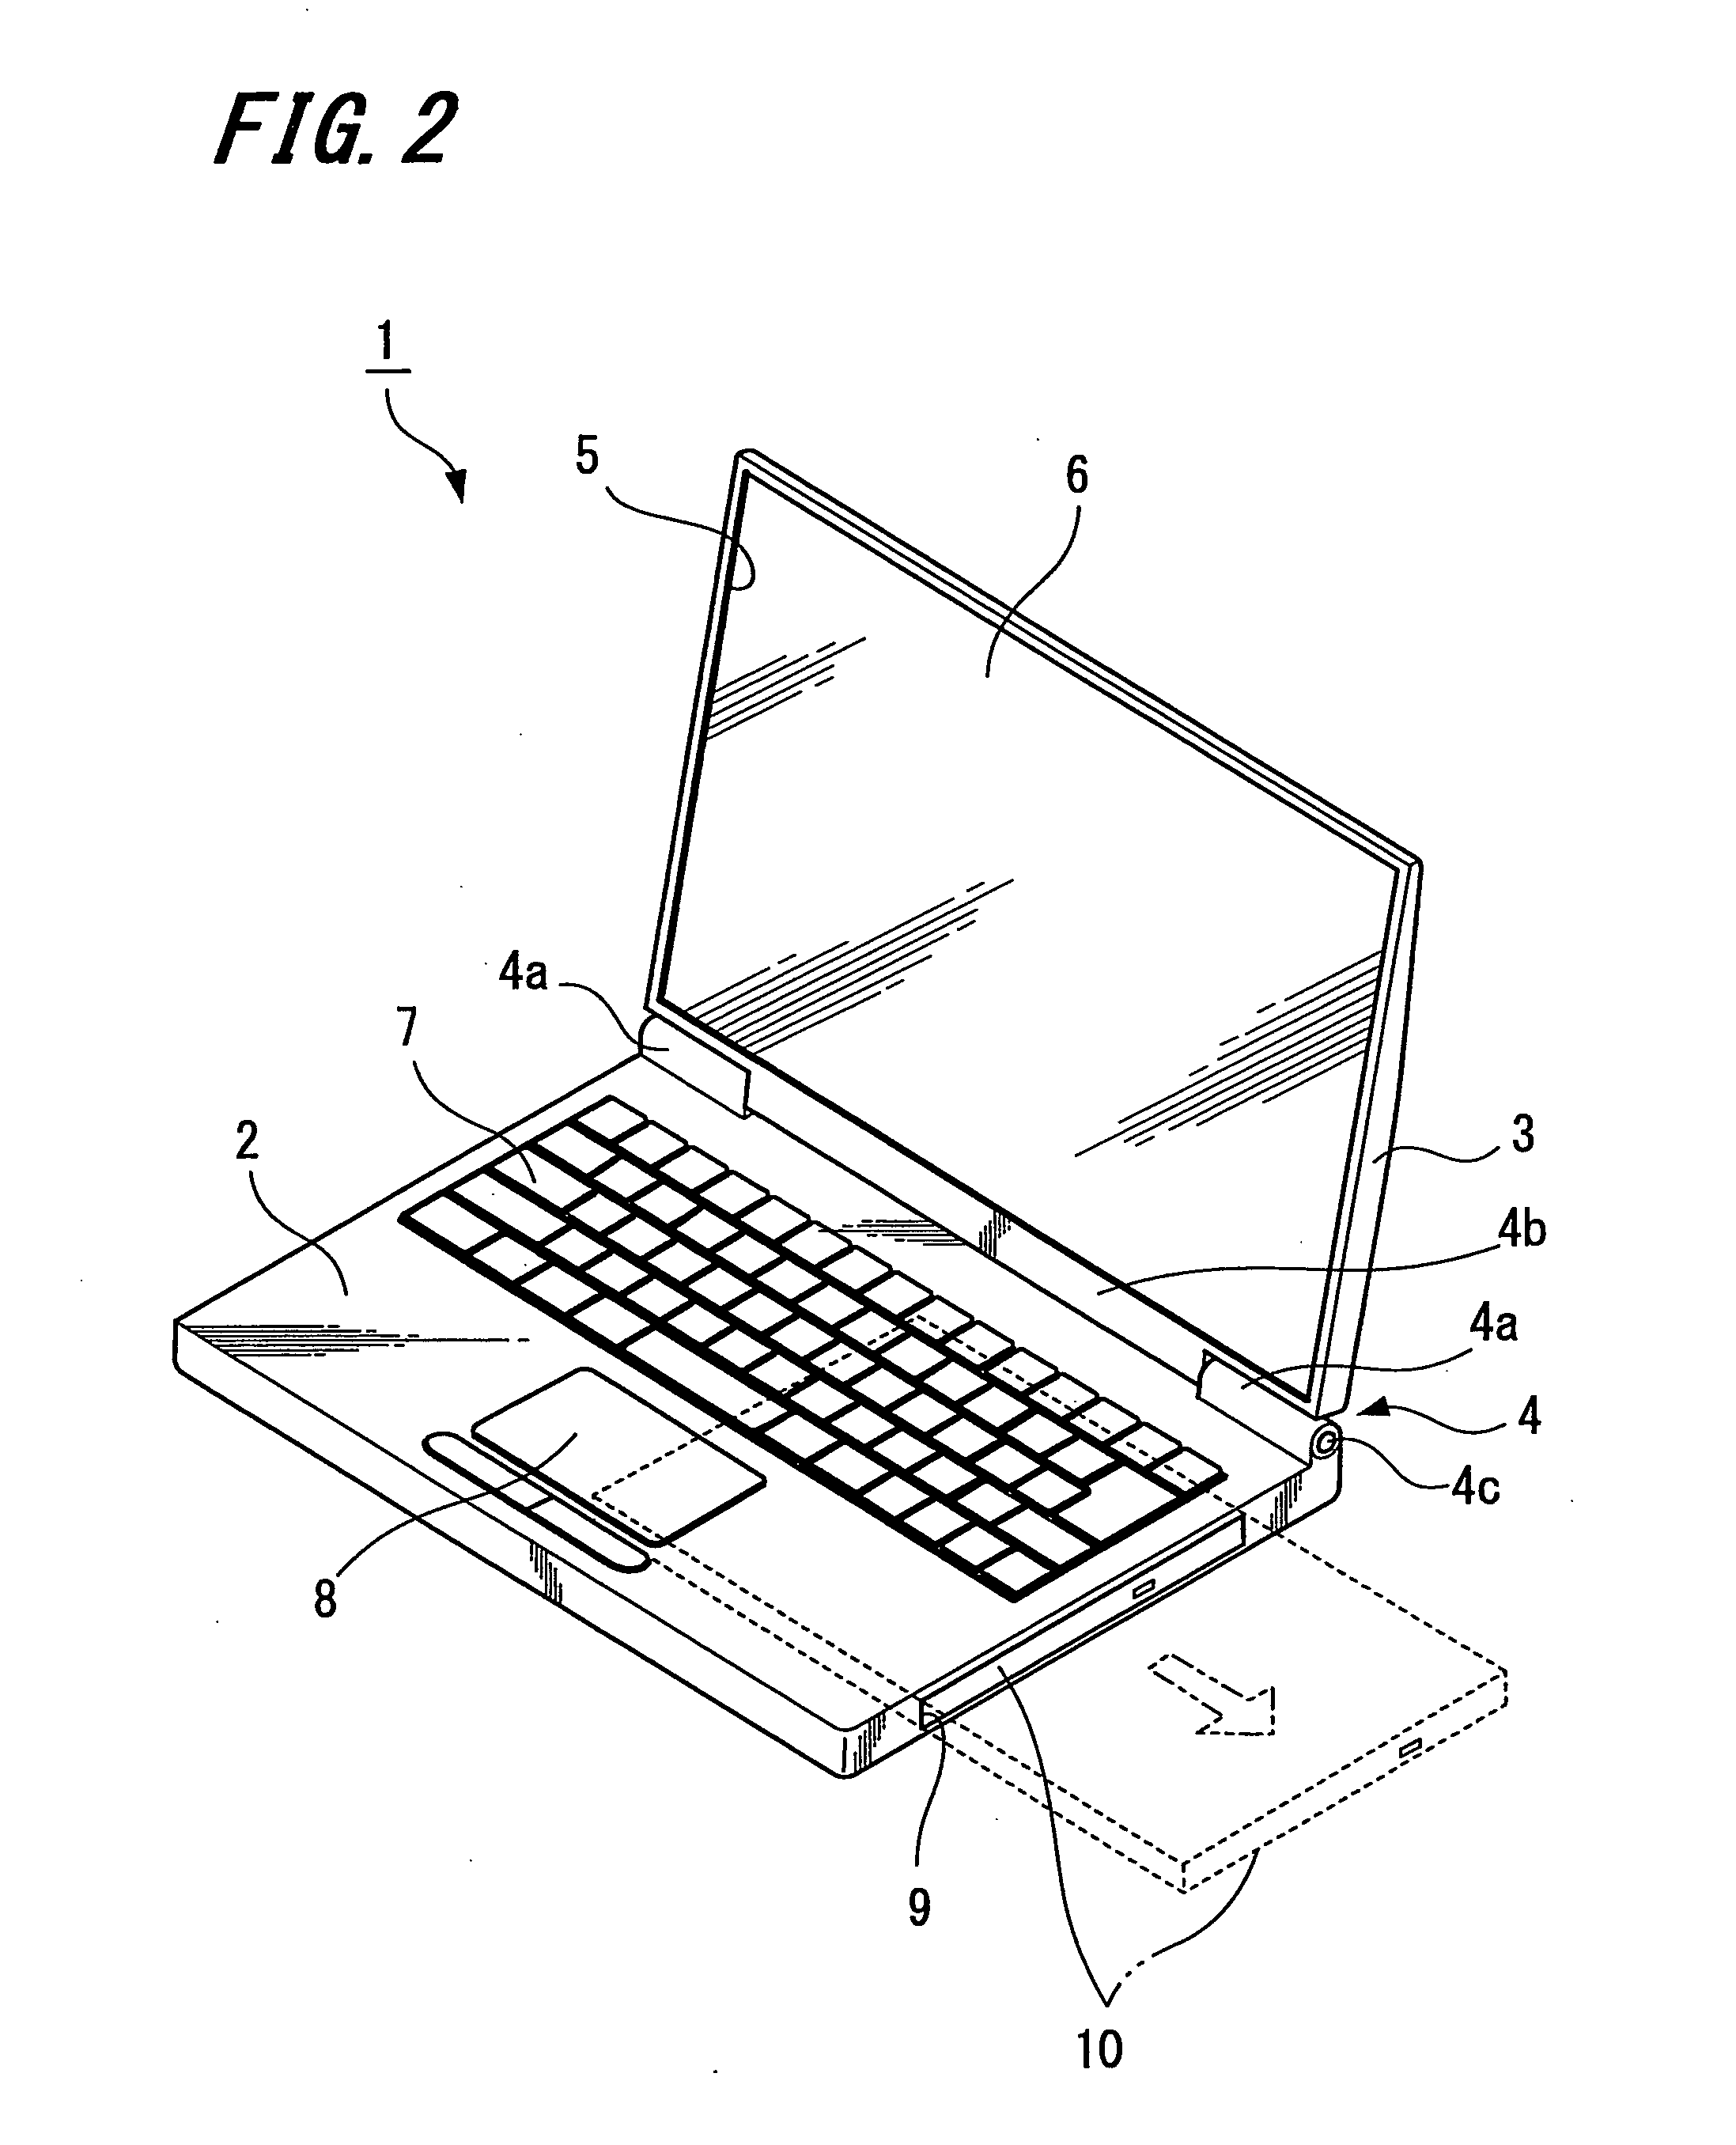 Disk recording and/or reproducing device